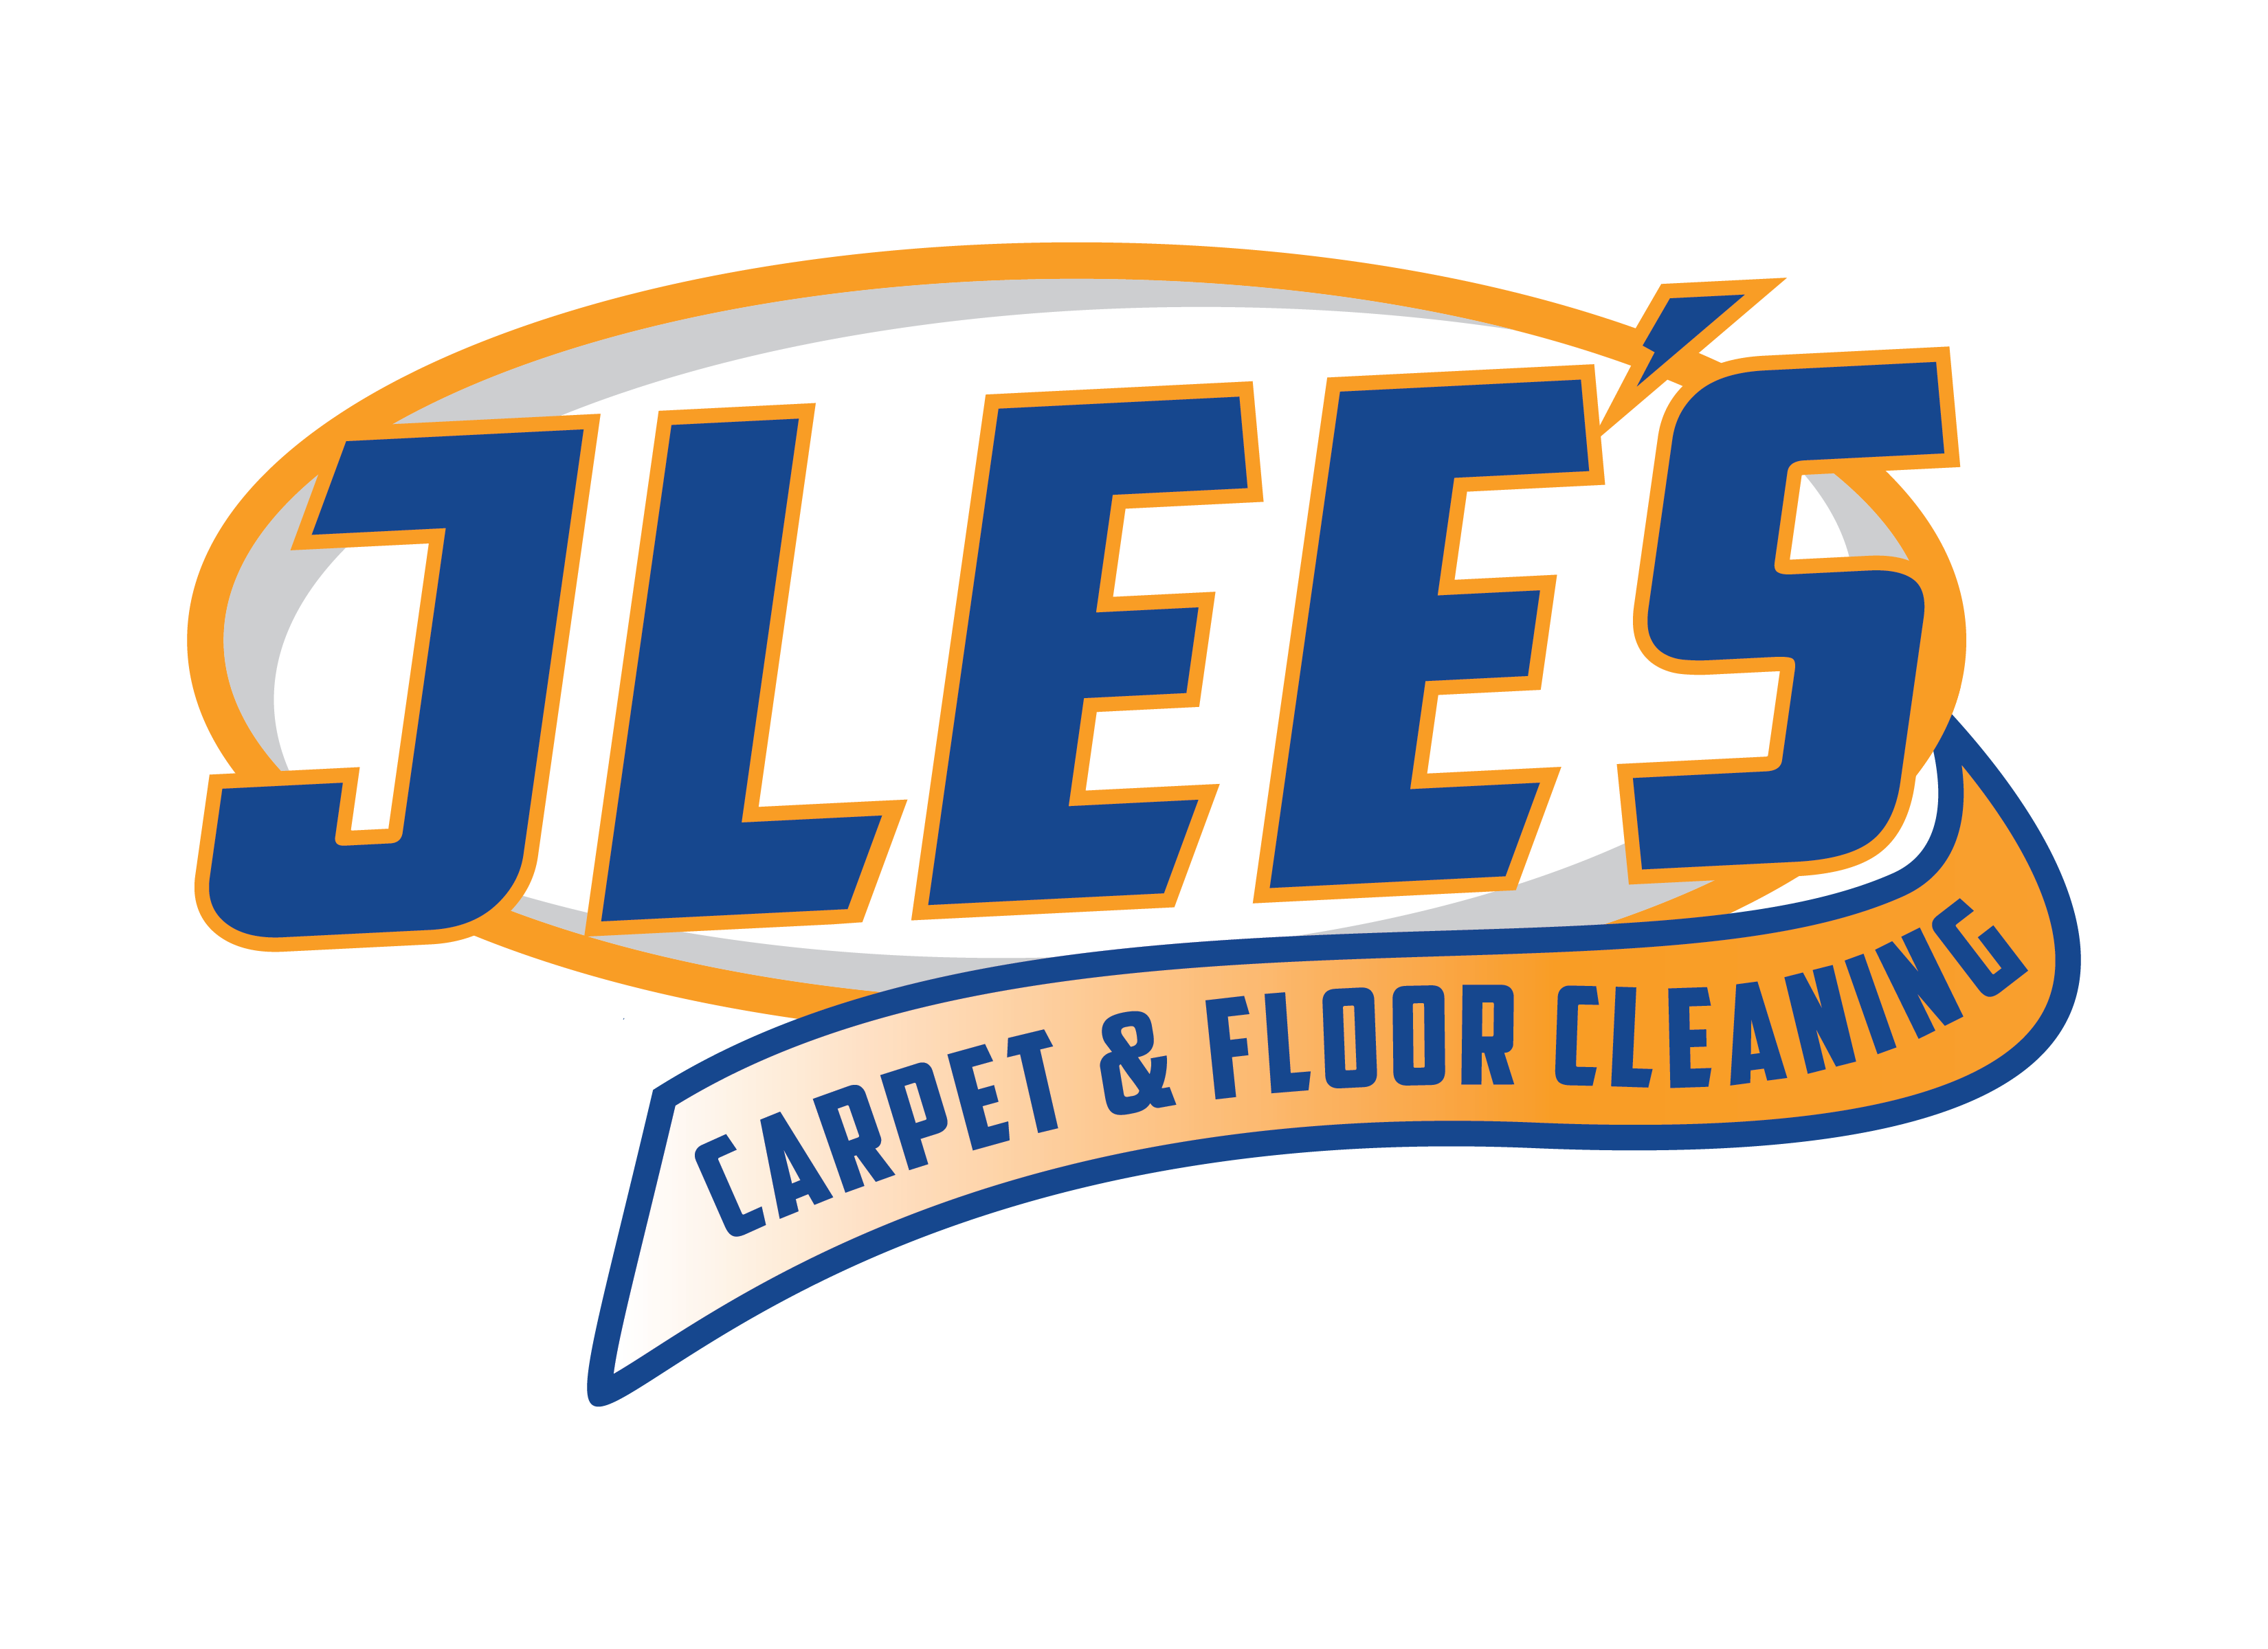 Jlees Carpet and Floors Edwardsville Illinois and St Louis Mo Carpet Cleaners. Located at 30 Kettle River Dr, Glen Carbon, IL 62034